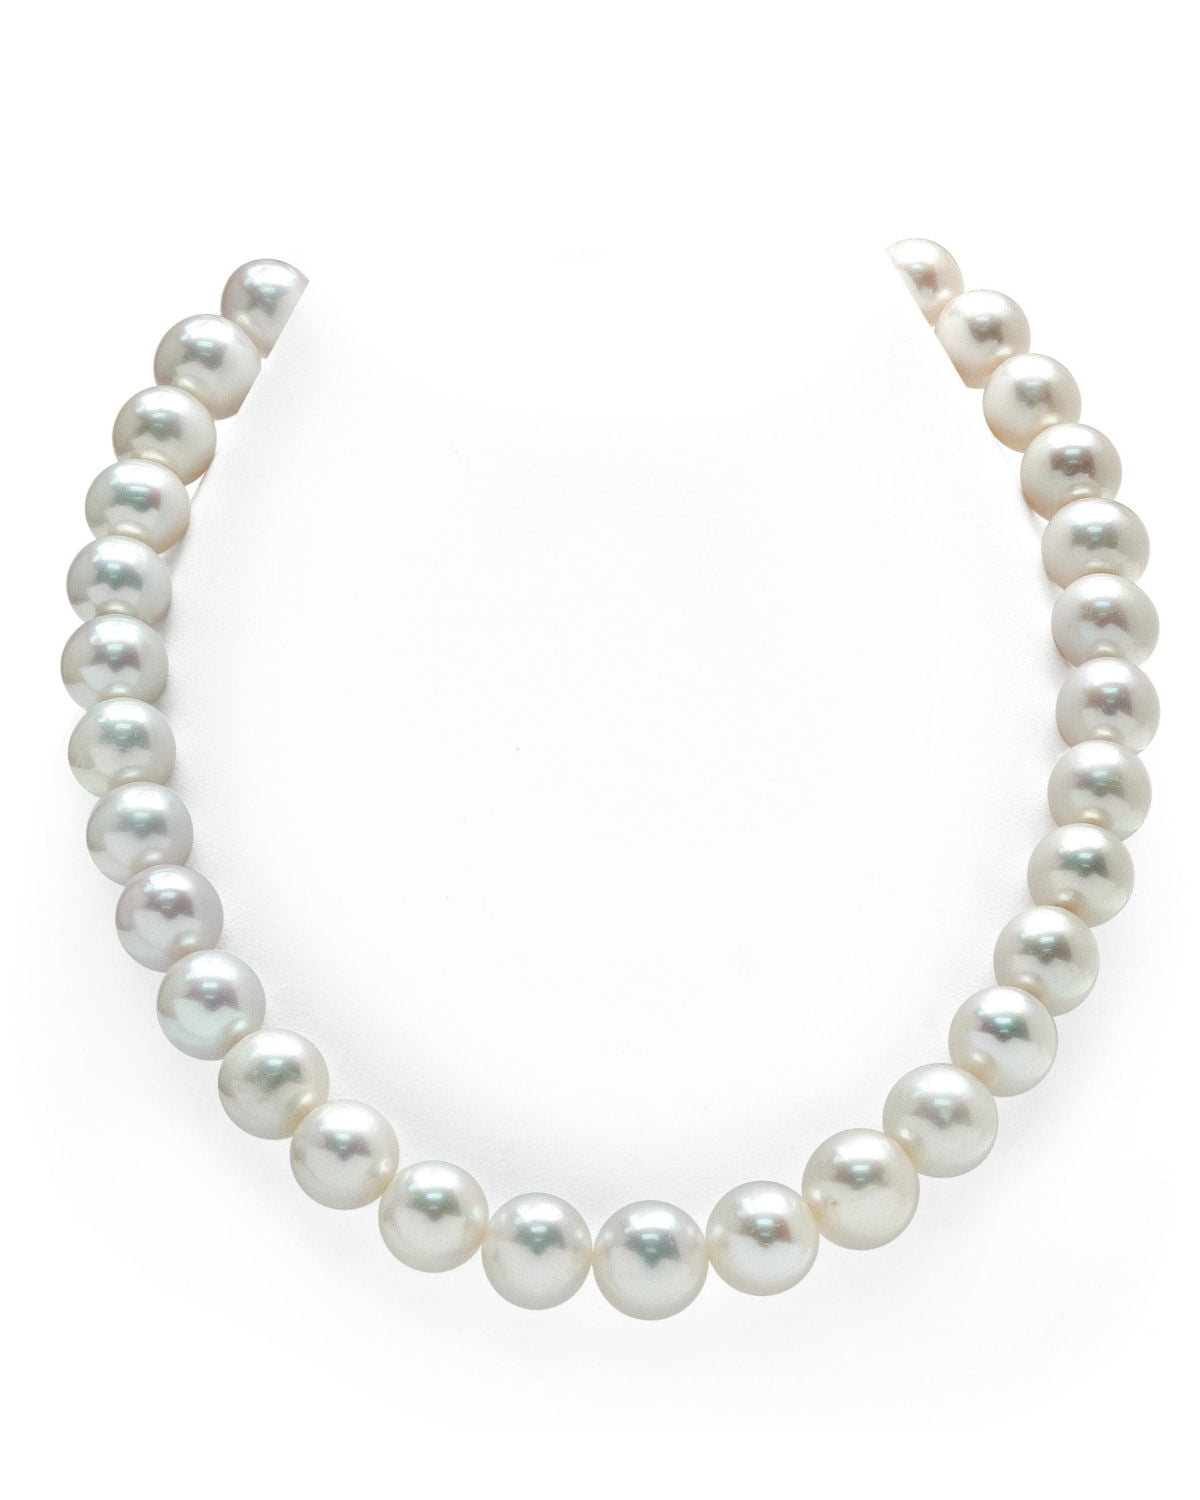 Yellow Gold-Tone White Freshwater Pearls Open Ovals Link Necklace 36"